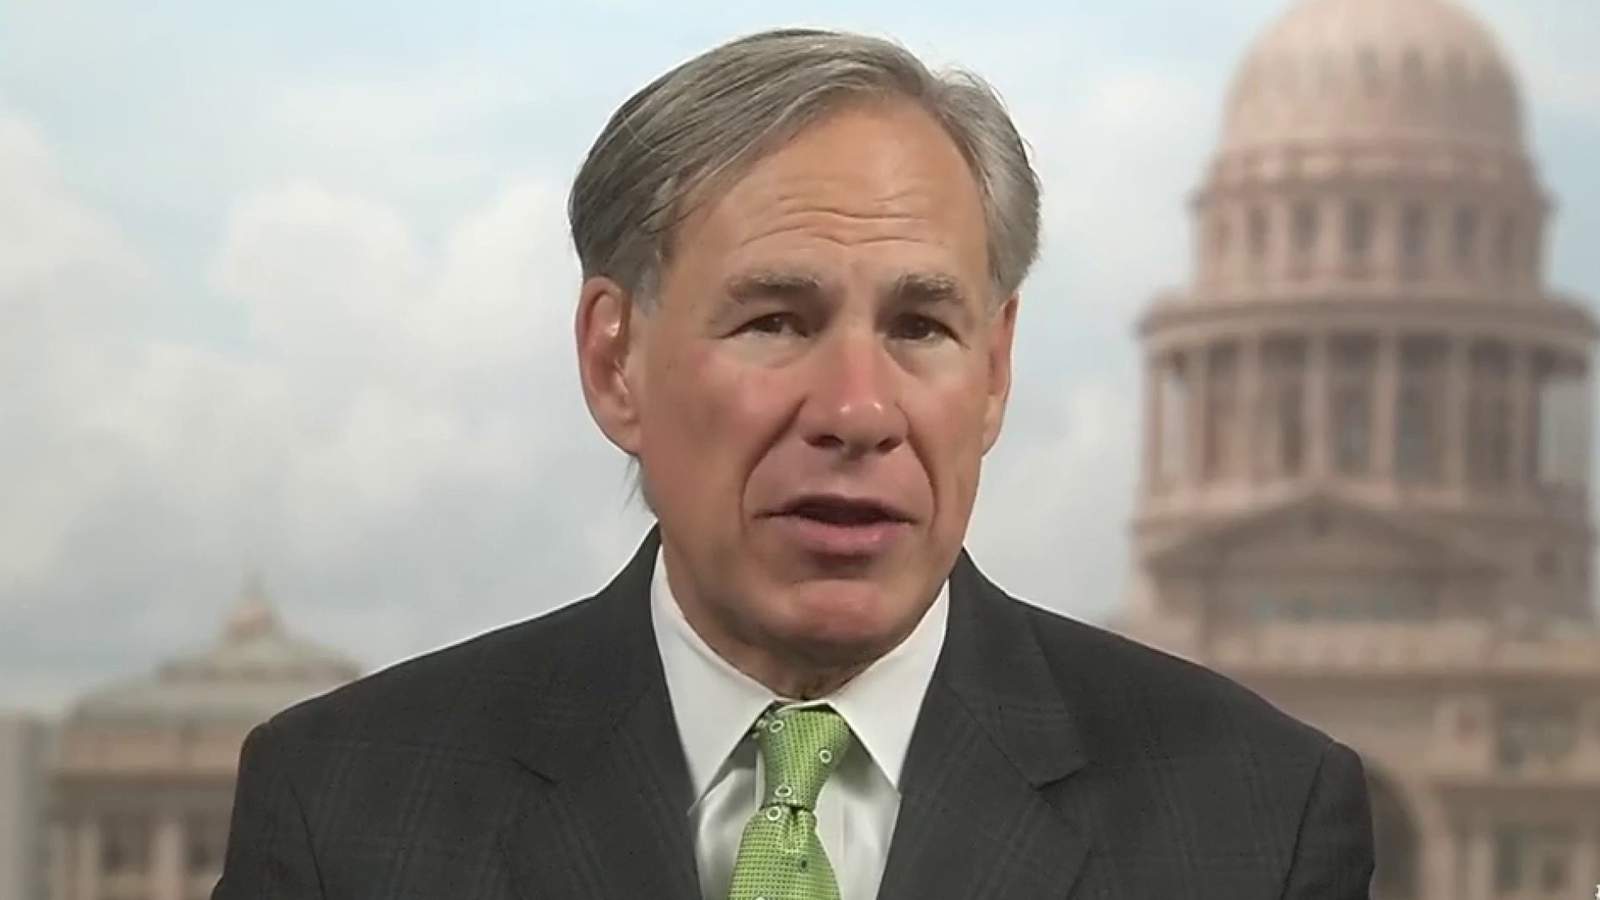 WATCH: Gov. Greg Abbott to give COVID-19 update as Texas surpasses 9,000 confirmed deaths